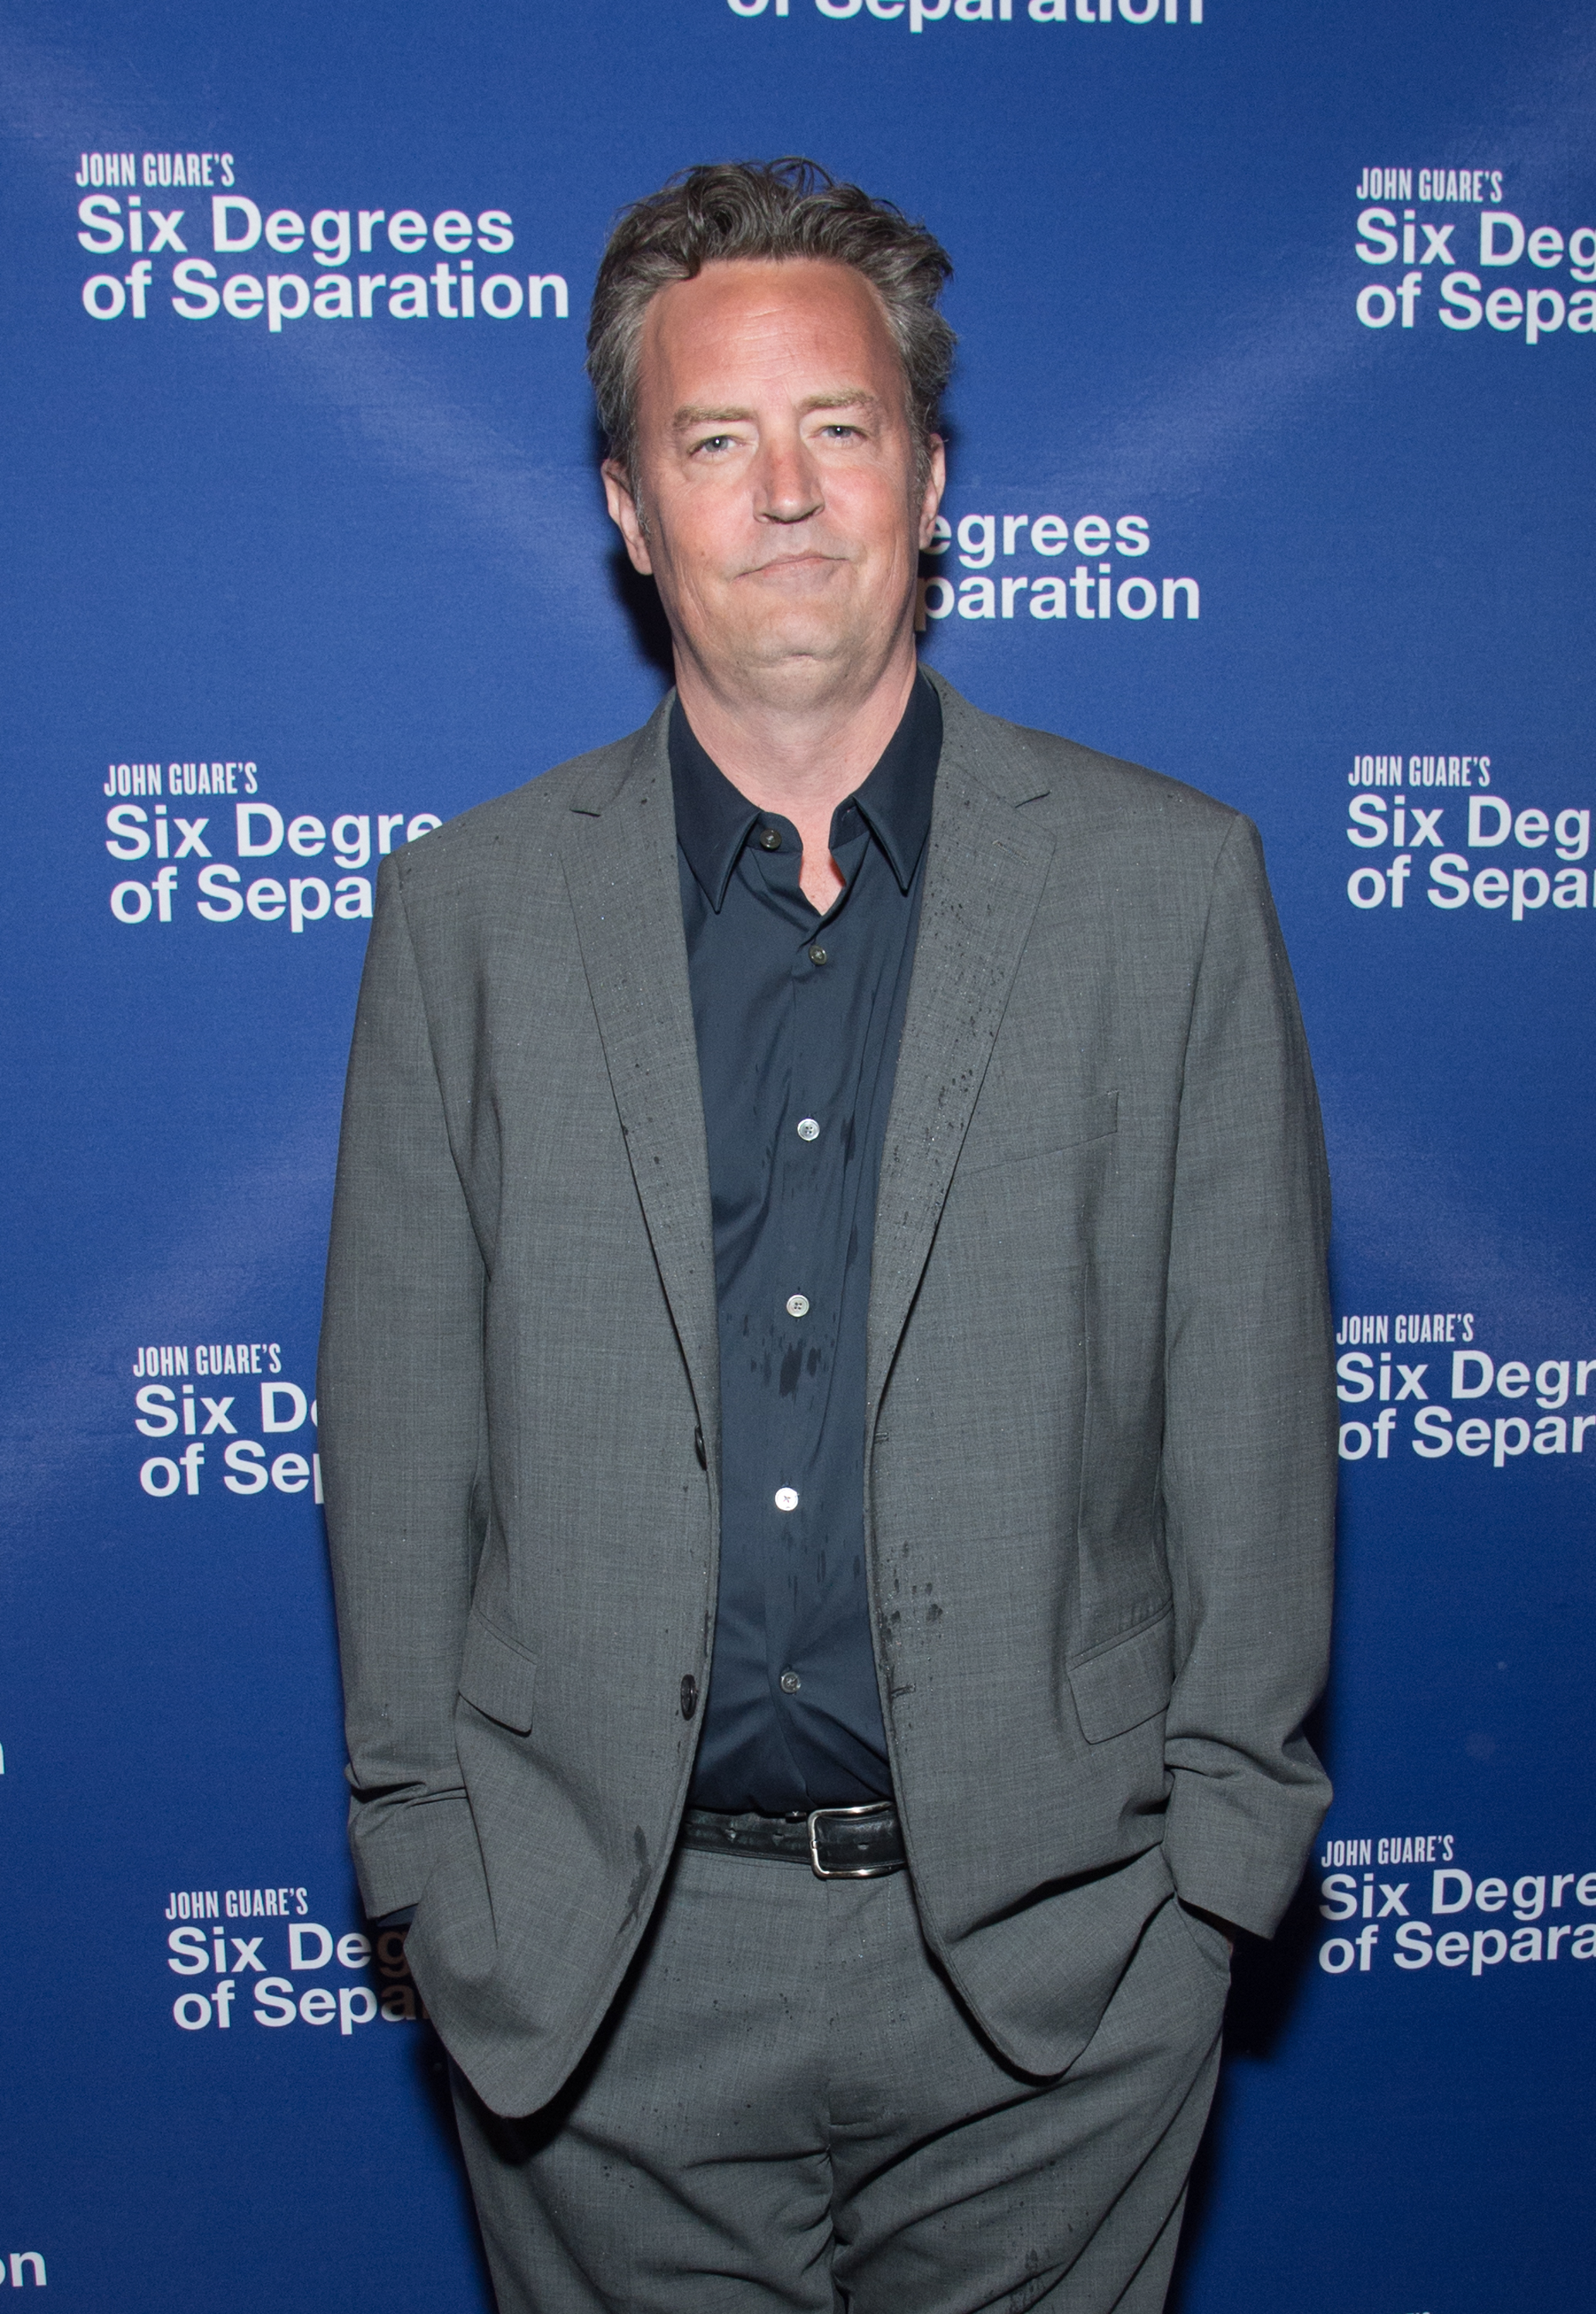 Matthew Perry at the "Six Degrees of Separation" opening night celebration in New York City on April 25, 2017 | Source: Getty Images